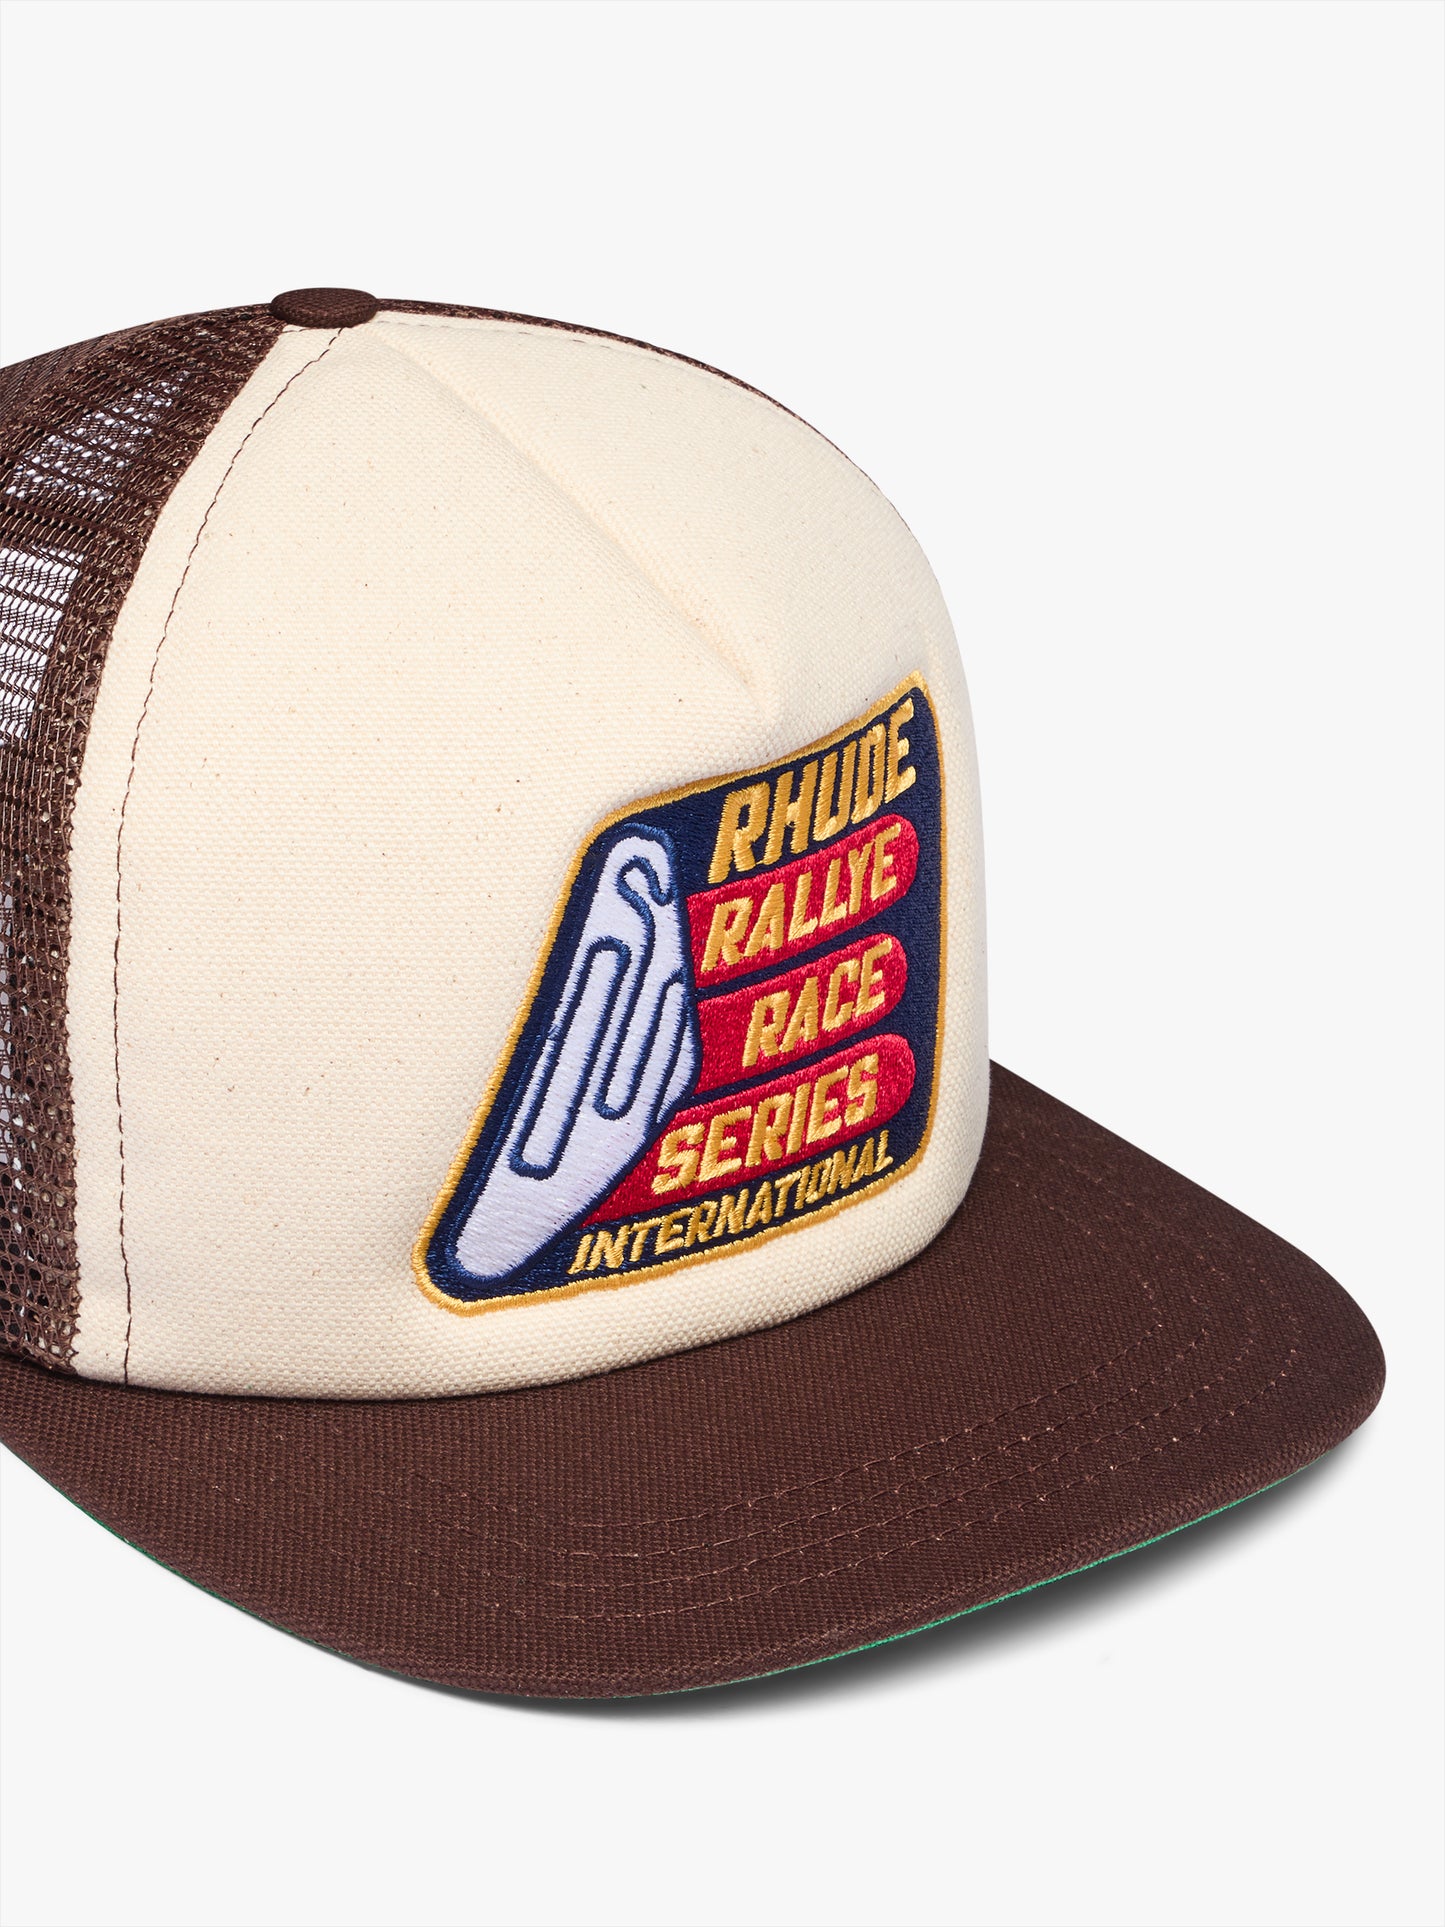 RACE SERIES WASHED TRUCKER HAT